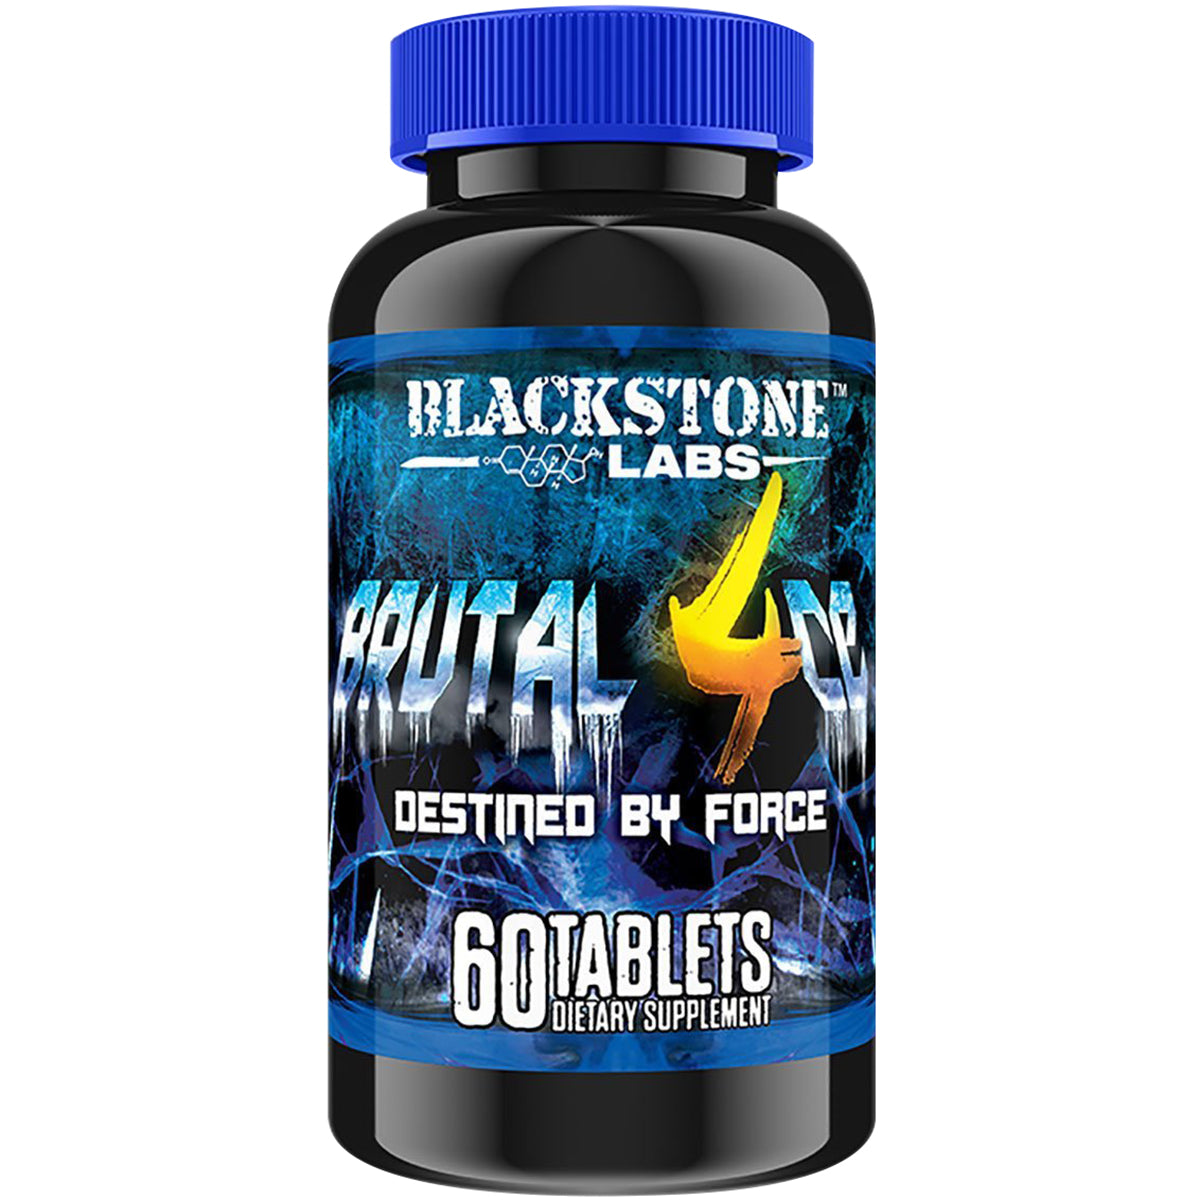 Blackstone Labs Brutal 4ce Muscle-Building Supplement - 60 Tablets Blackstone Labs